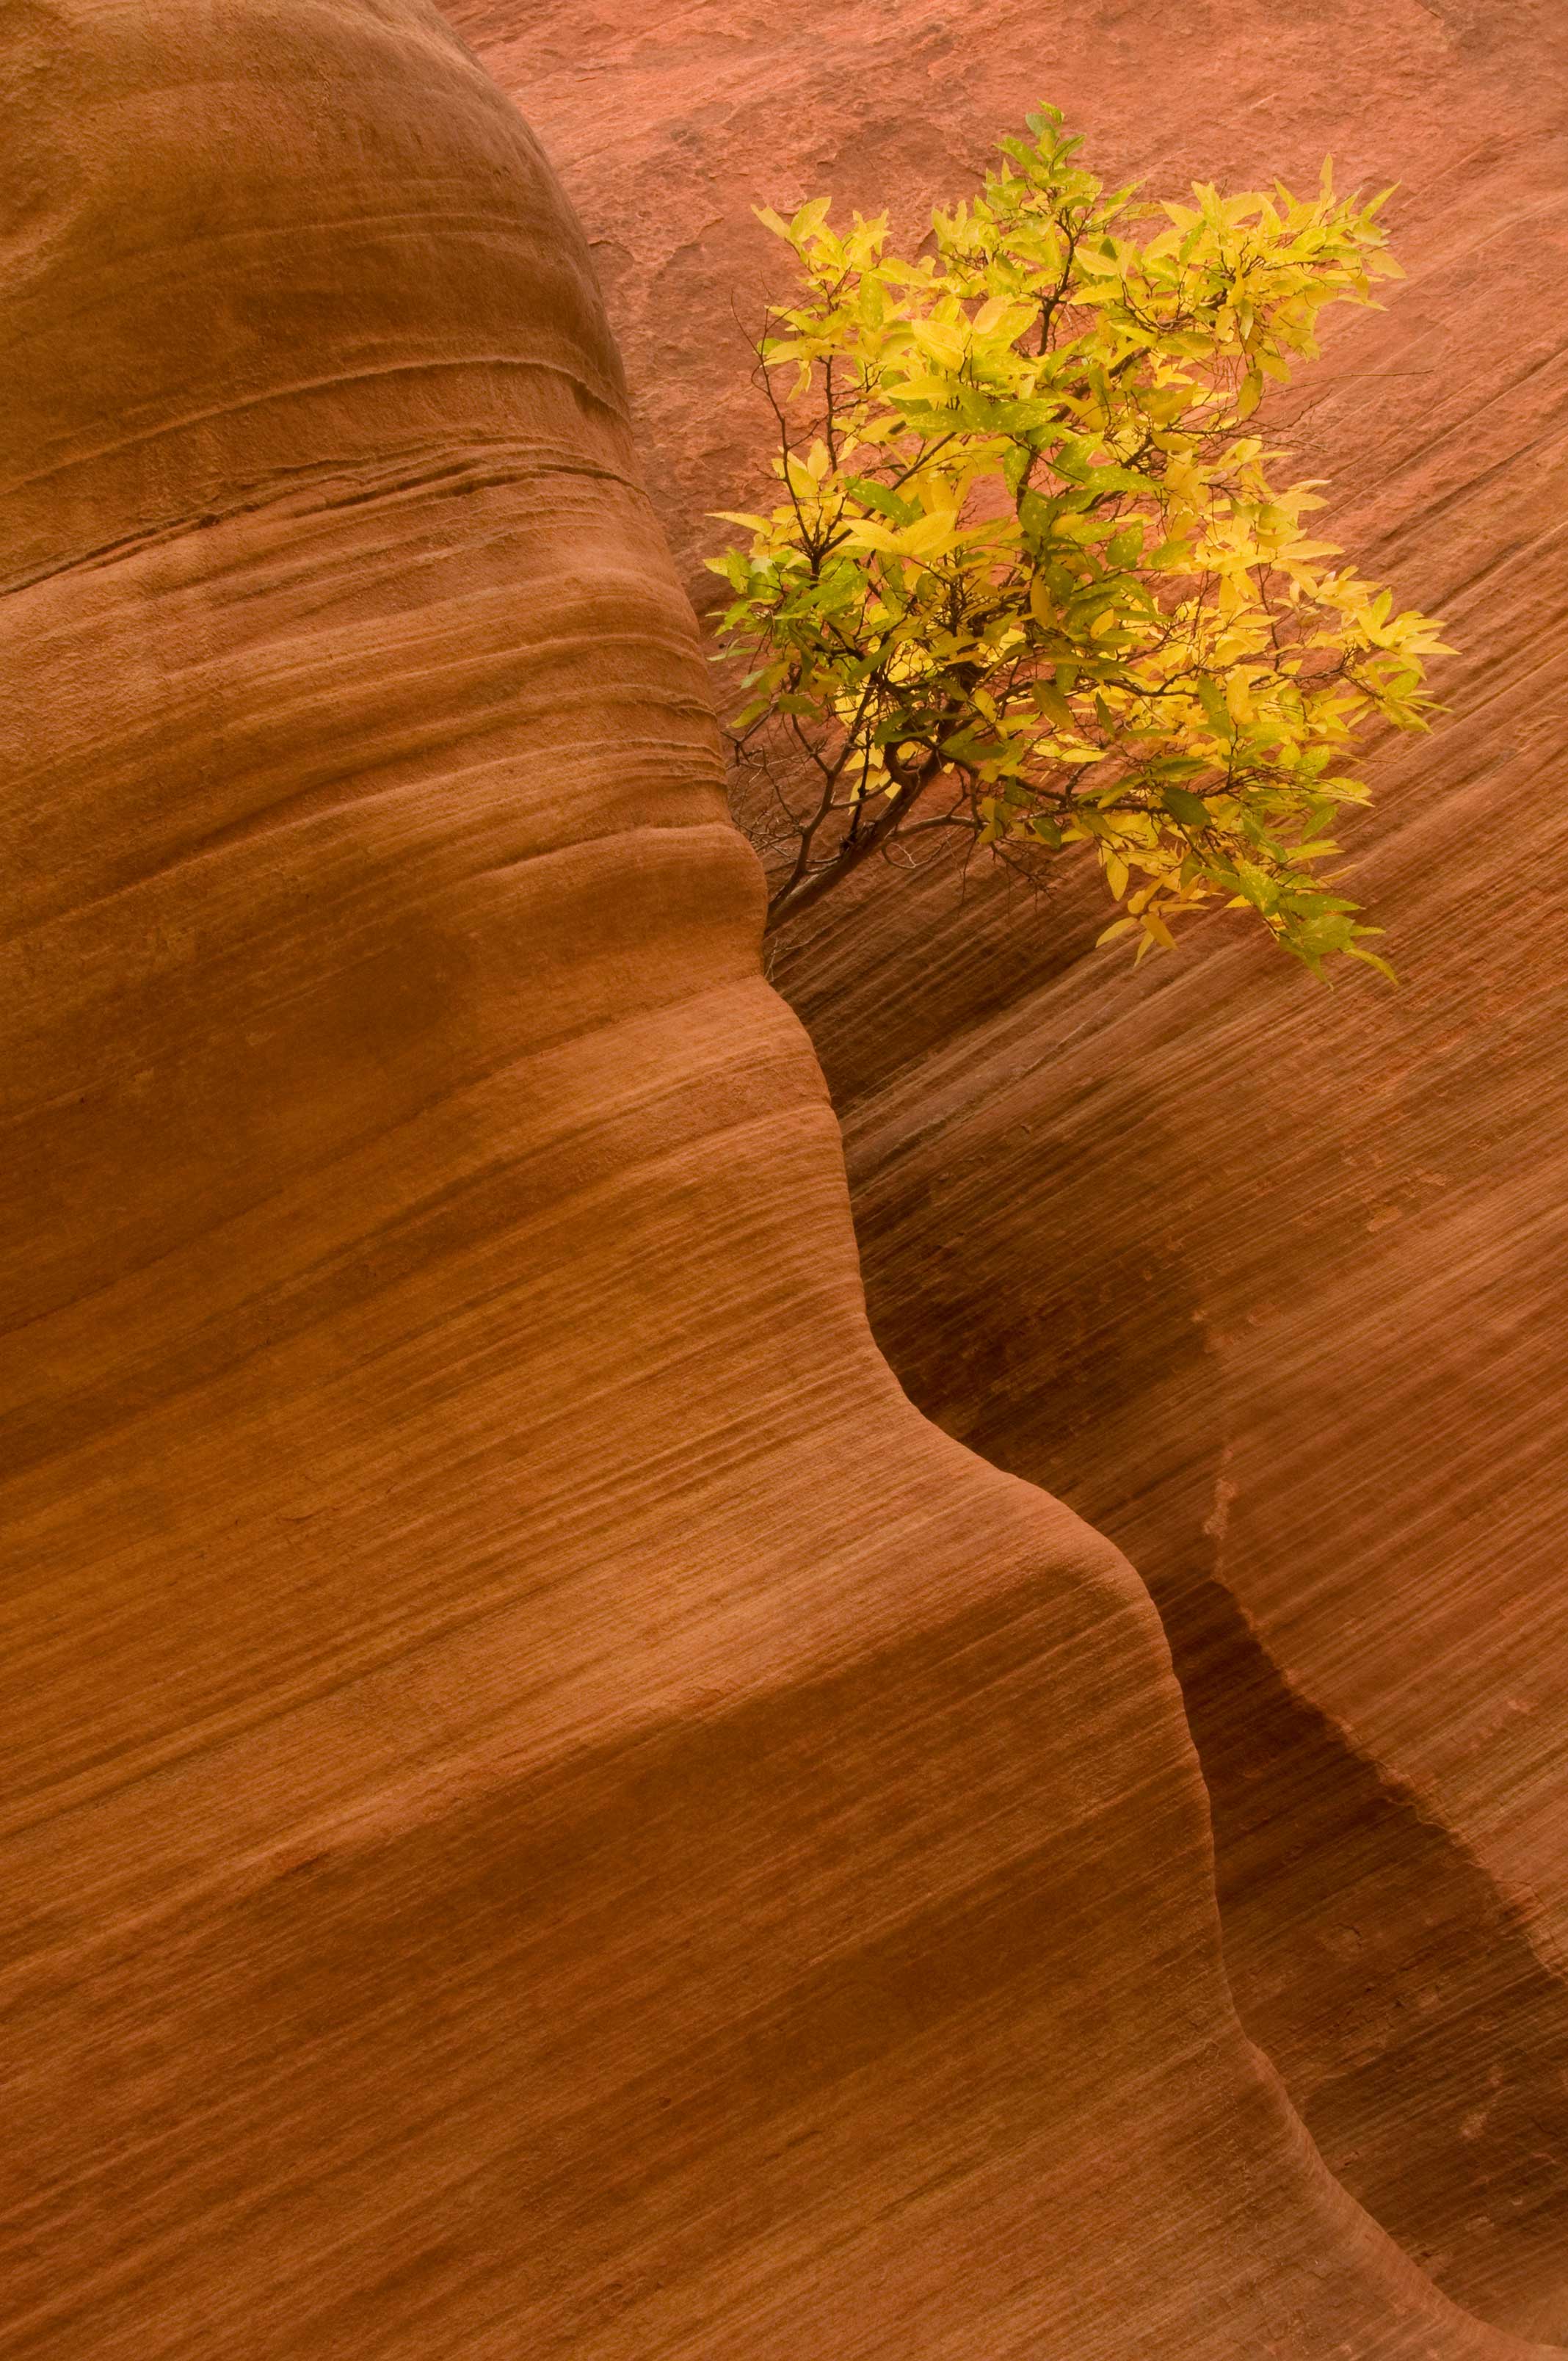 Buckskin Gulch slot canyon in Utah with a young tree growing in the sandstone